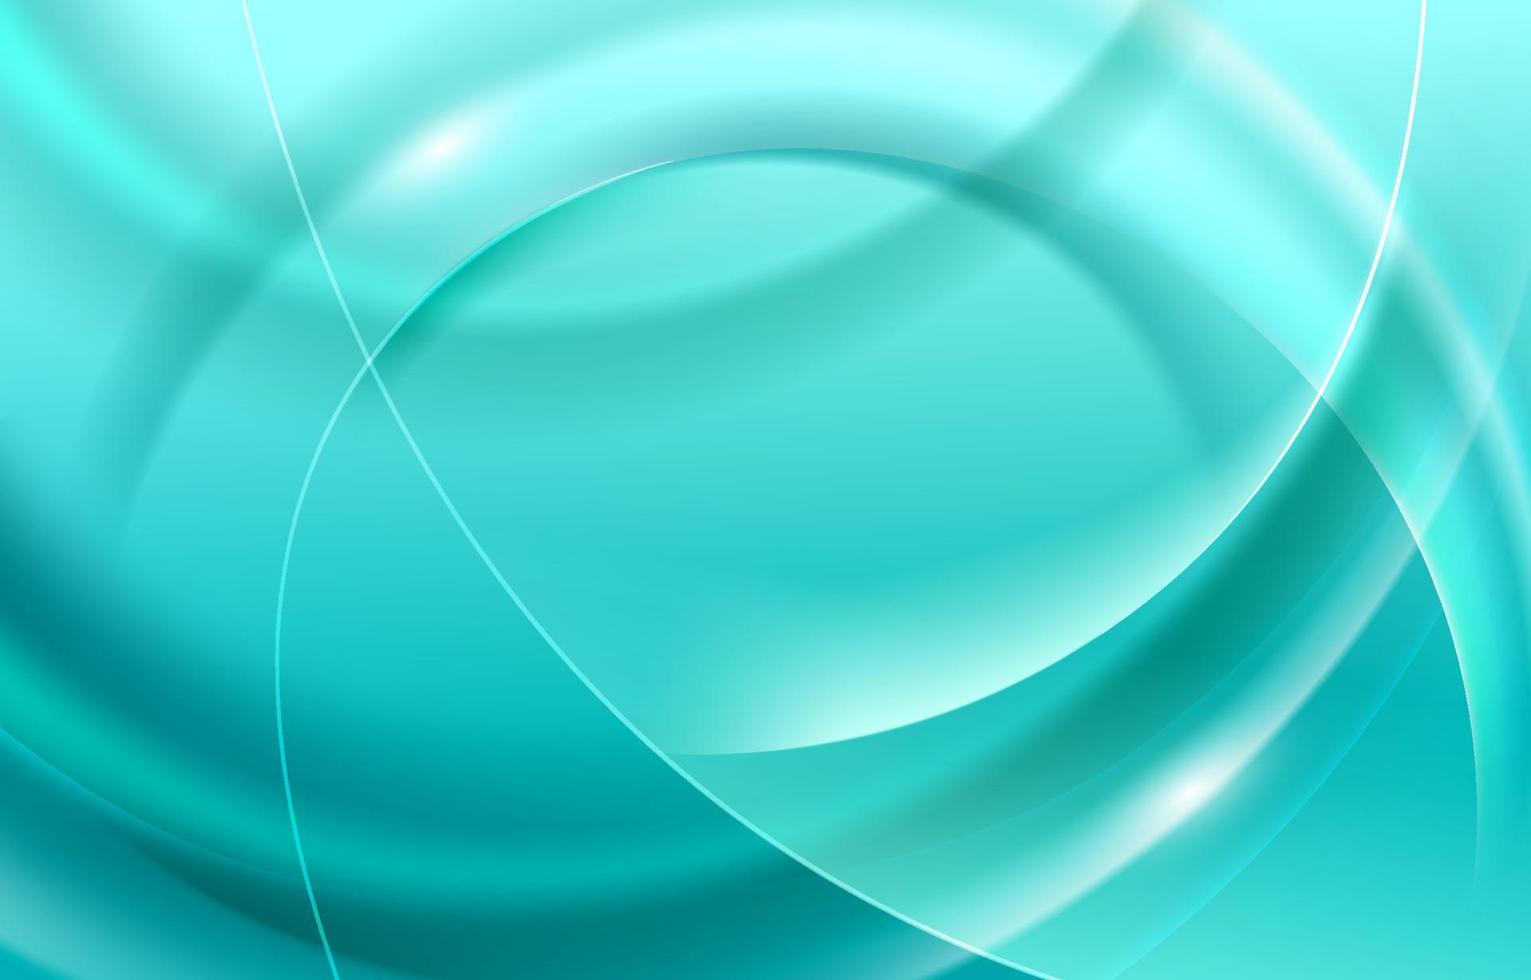 Mint Green Wave Abtract Background vector